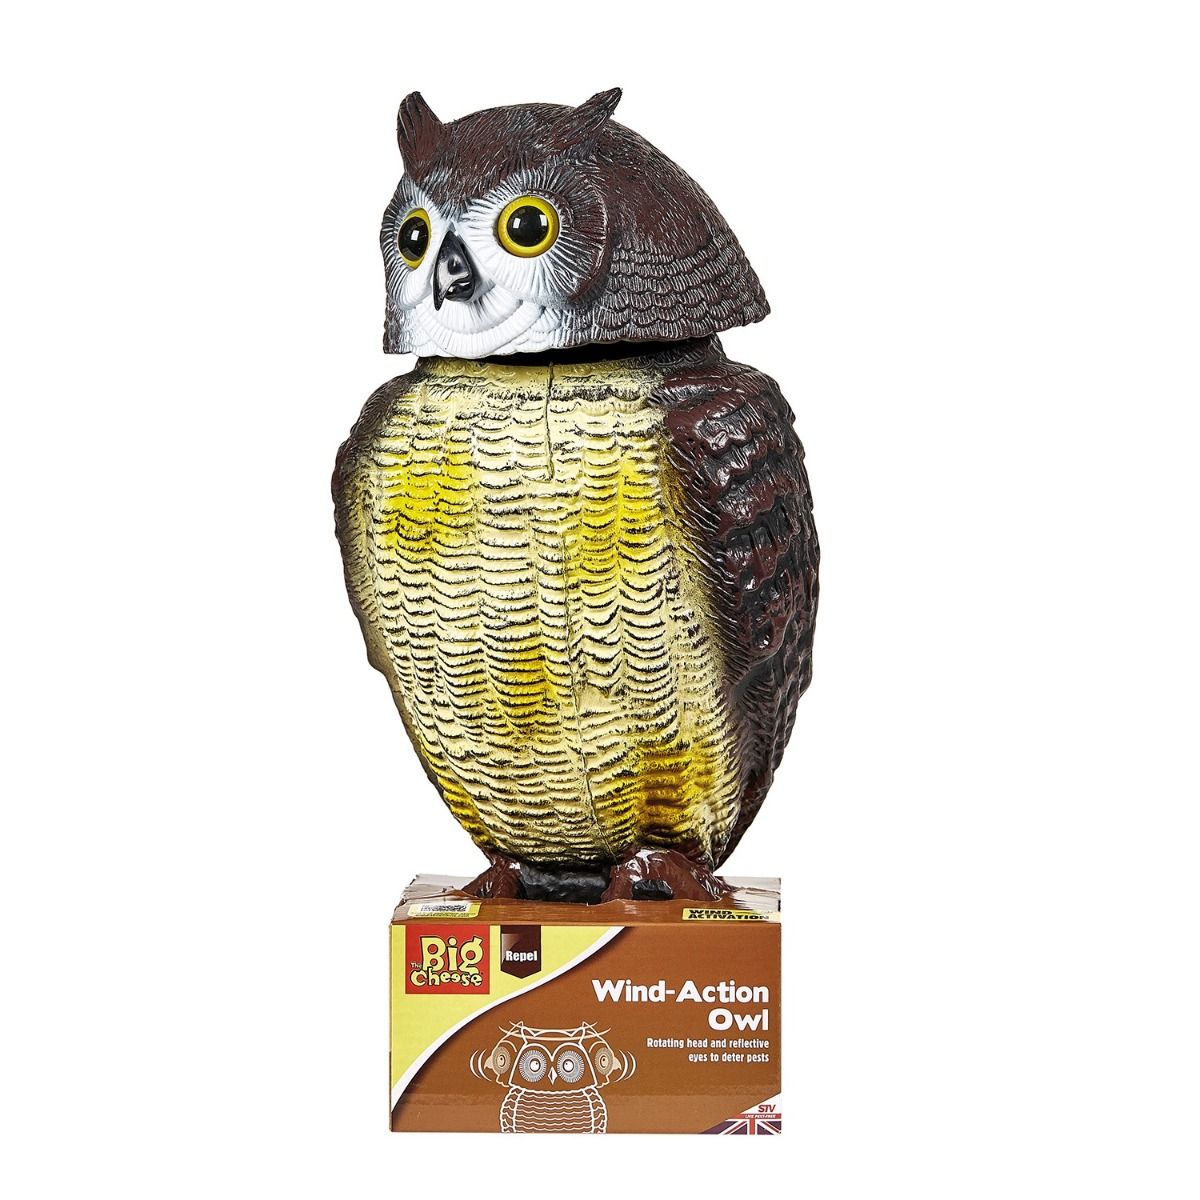 Big-Cheese-Wind-Action-Owl